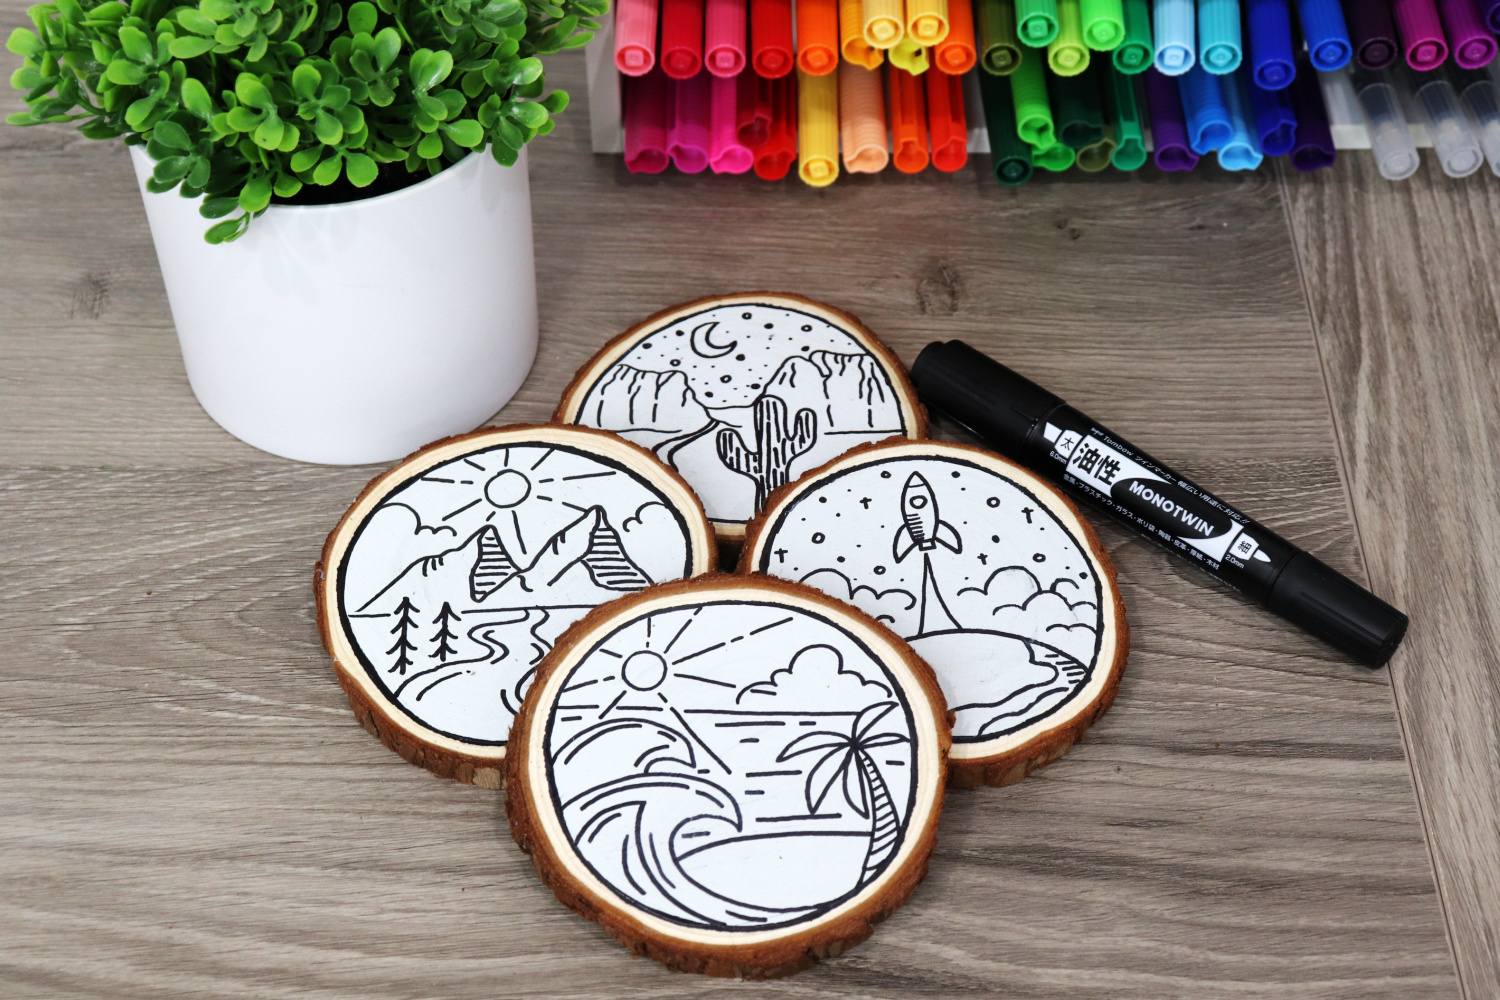 Image contains four monoline travel coasters: one is beach themed, one mountain themed, one desert themed, and one space themed, on a wooden desk. Surrounding them are a faux plant, an organizer filled with multicolored markers, and a MONOTwin bold marker.